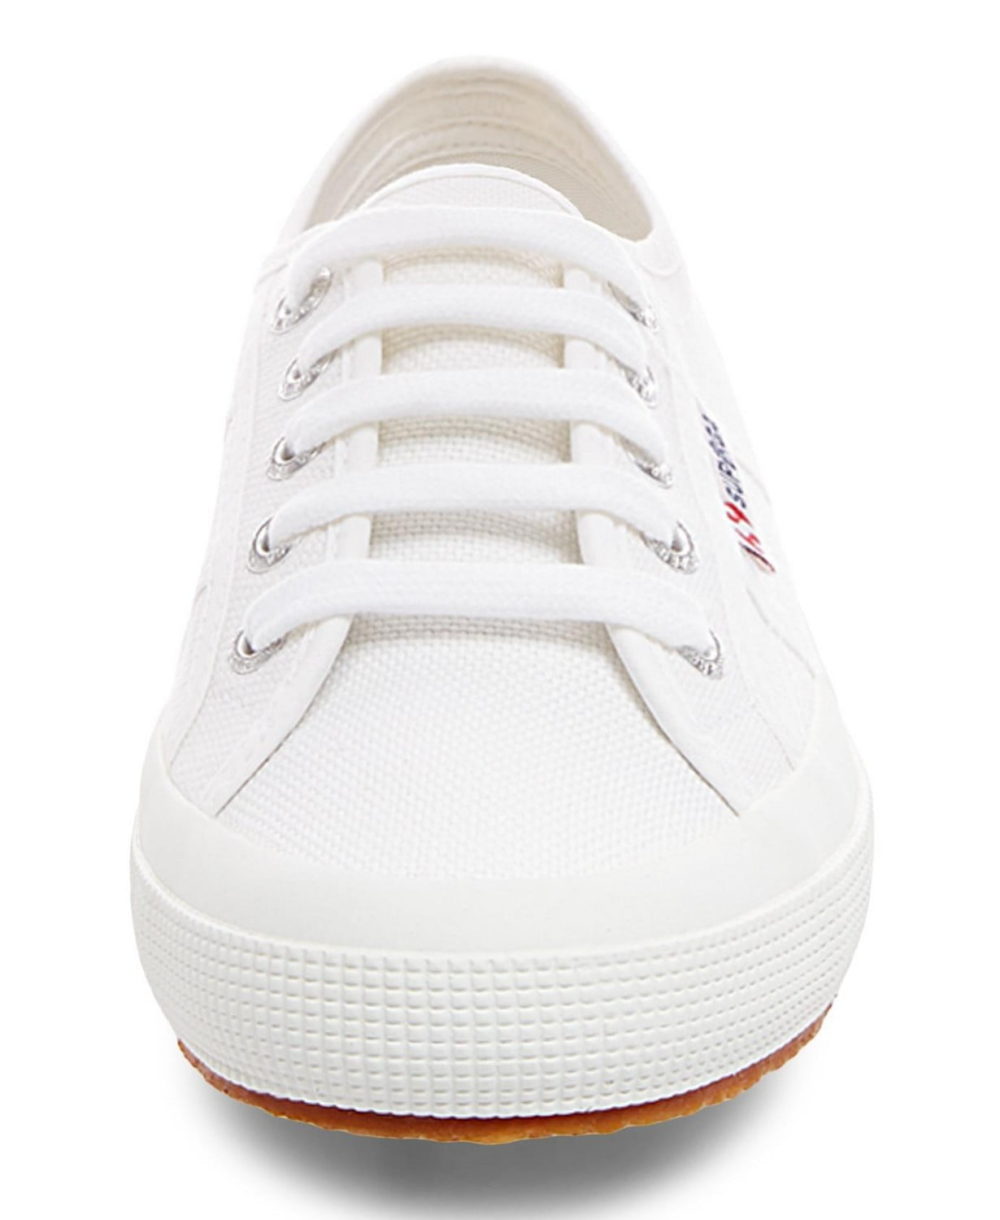 woocommerce-673321-2209615.cloudwaysapps.com-superga-womens-white-canvas-lace-up-low-top-sneakers